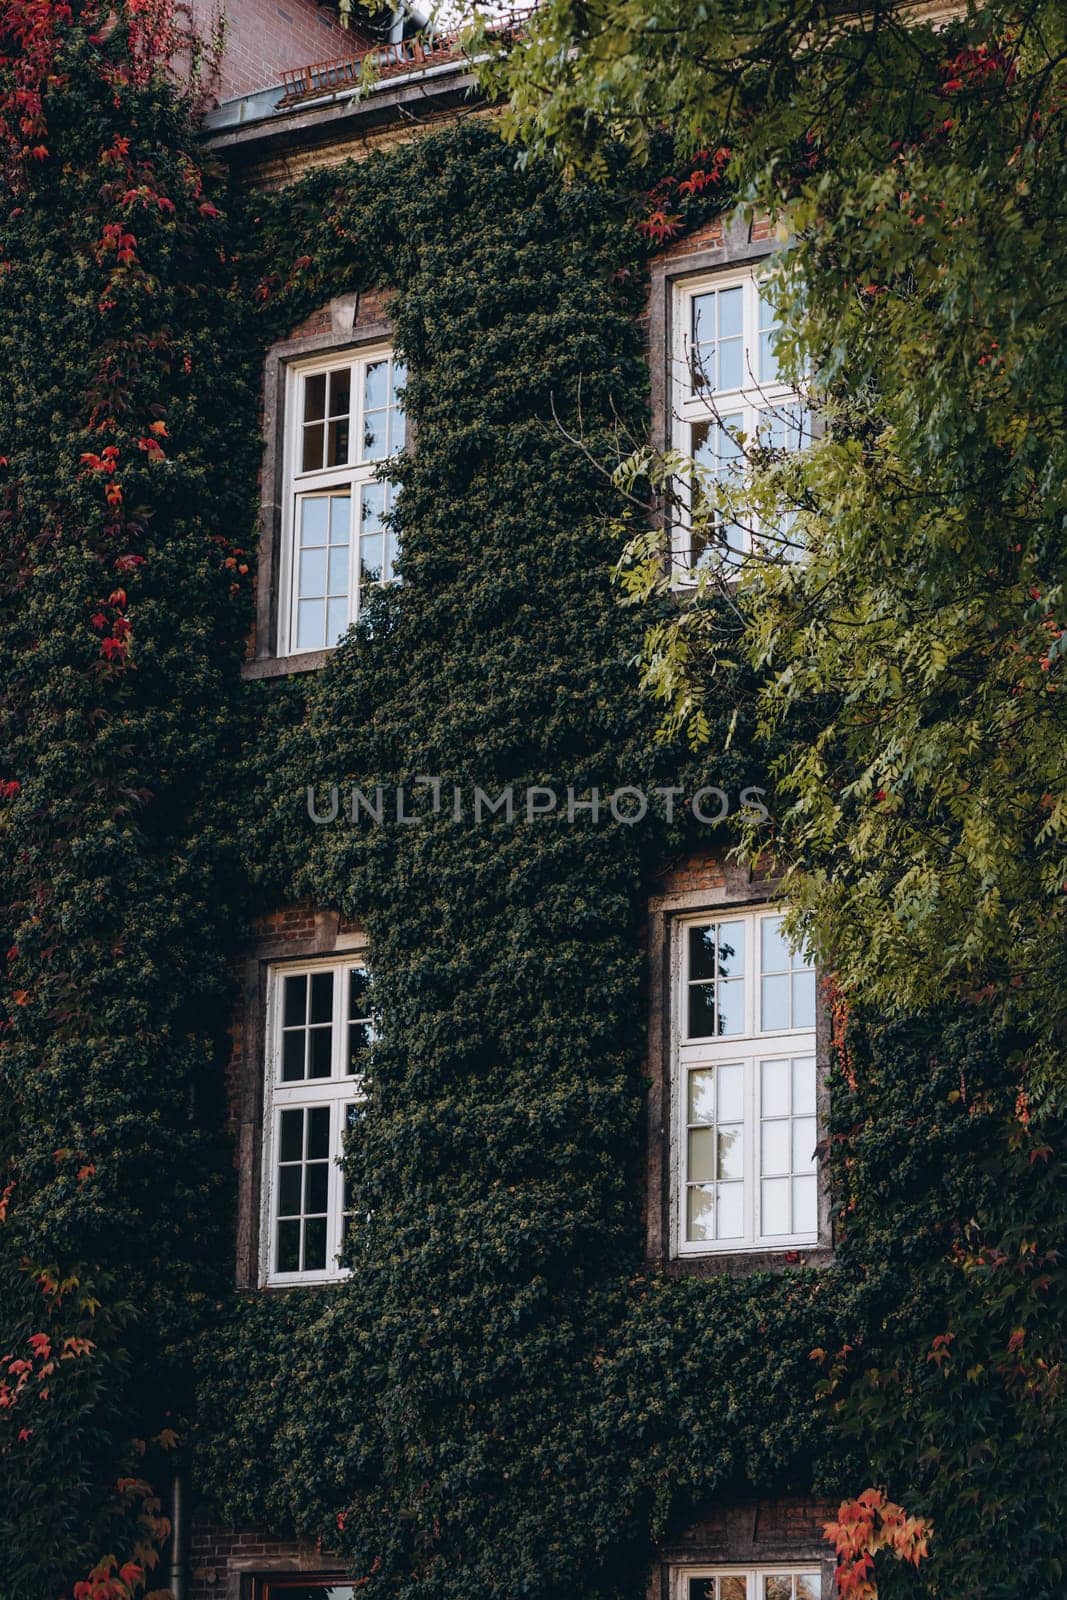 Stone walls of kings palace covered with green climbing plants. Windows with wooden frames of Wawel Royal Castle in Krakow, Poland